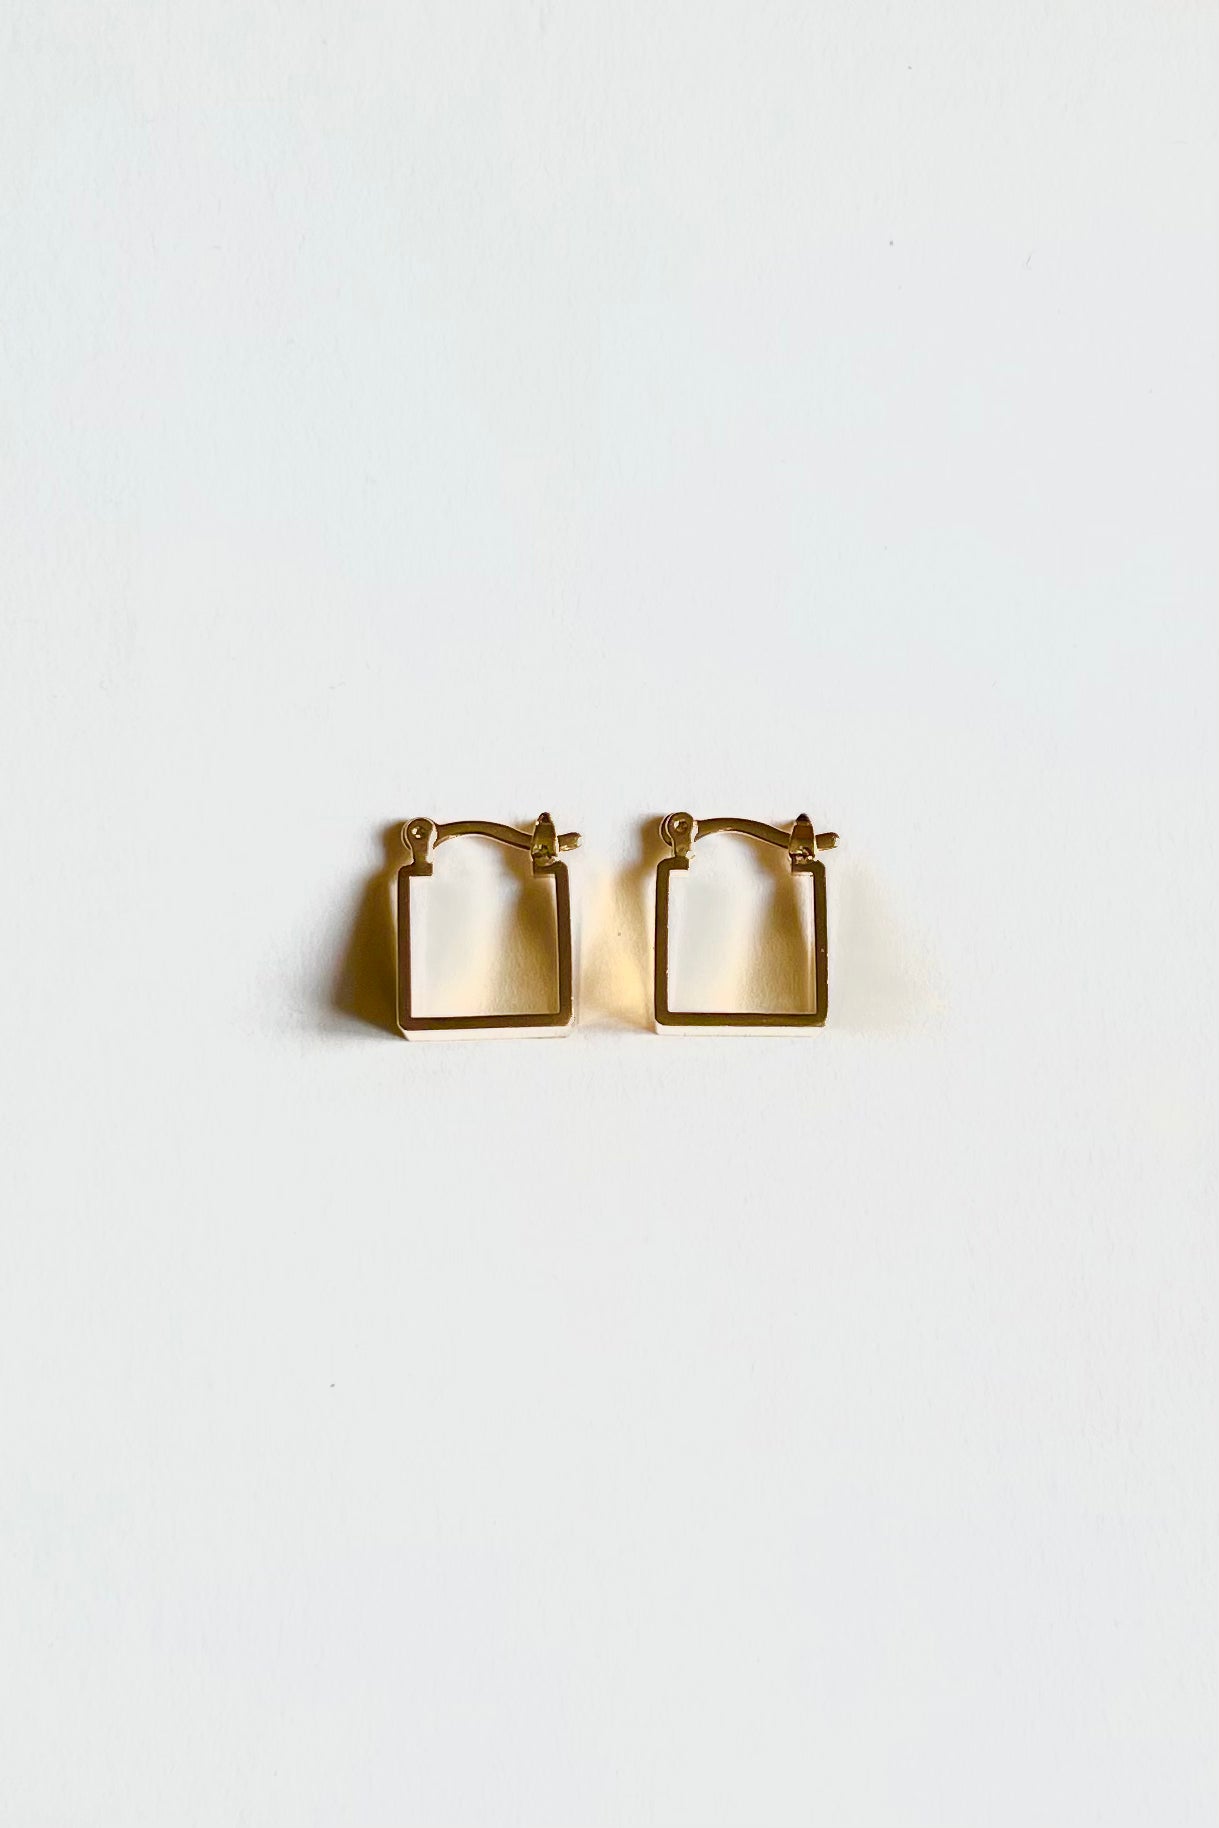 Top view angle of the gold square hoops on a white background.